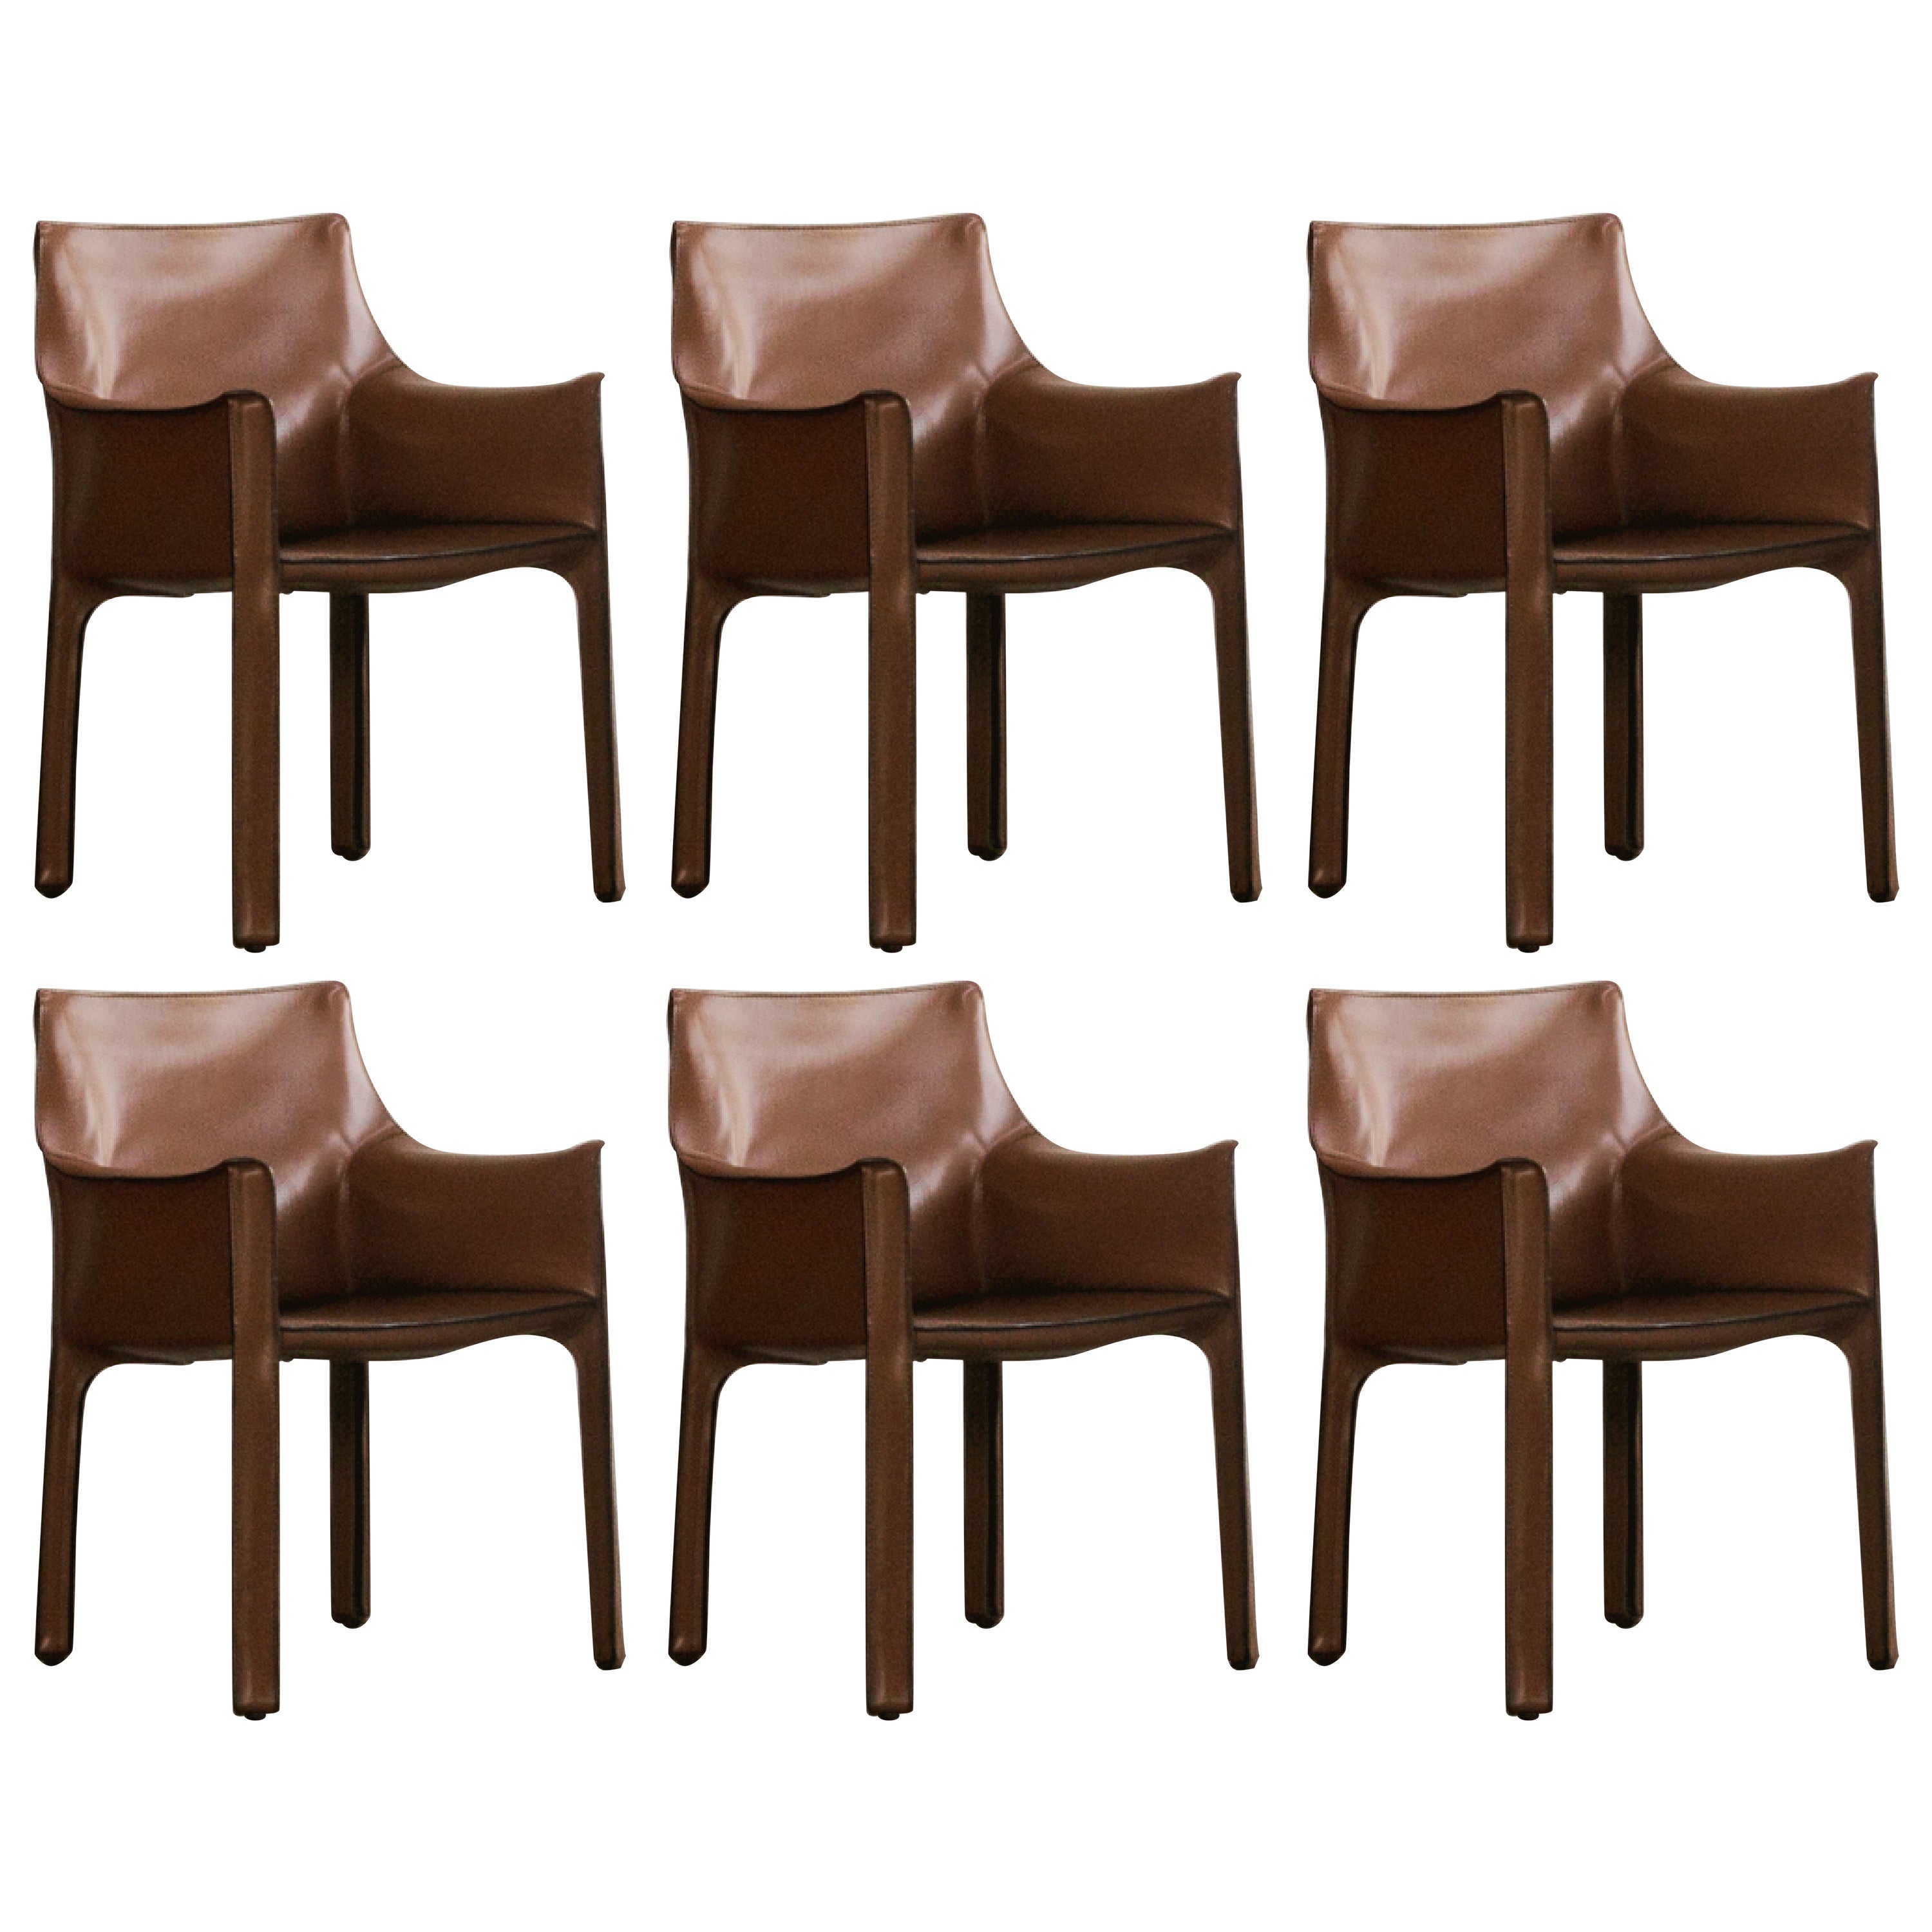 Mario Bellini "CAB 413" Dining Chairs for Cassina, 1977, Set of 6